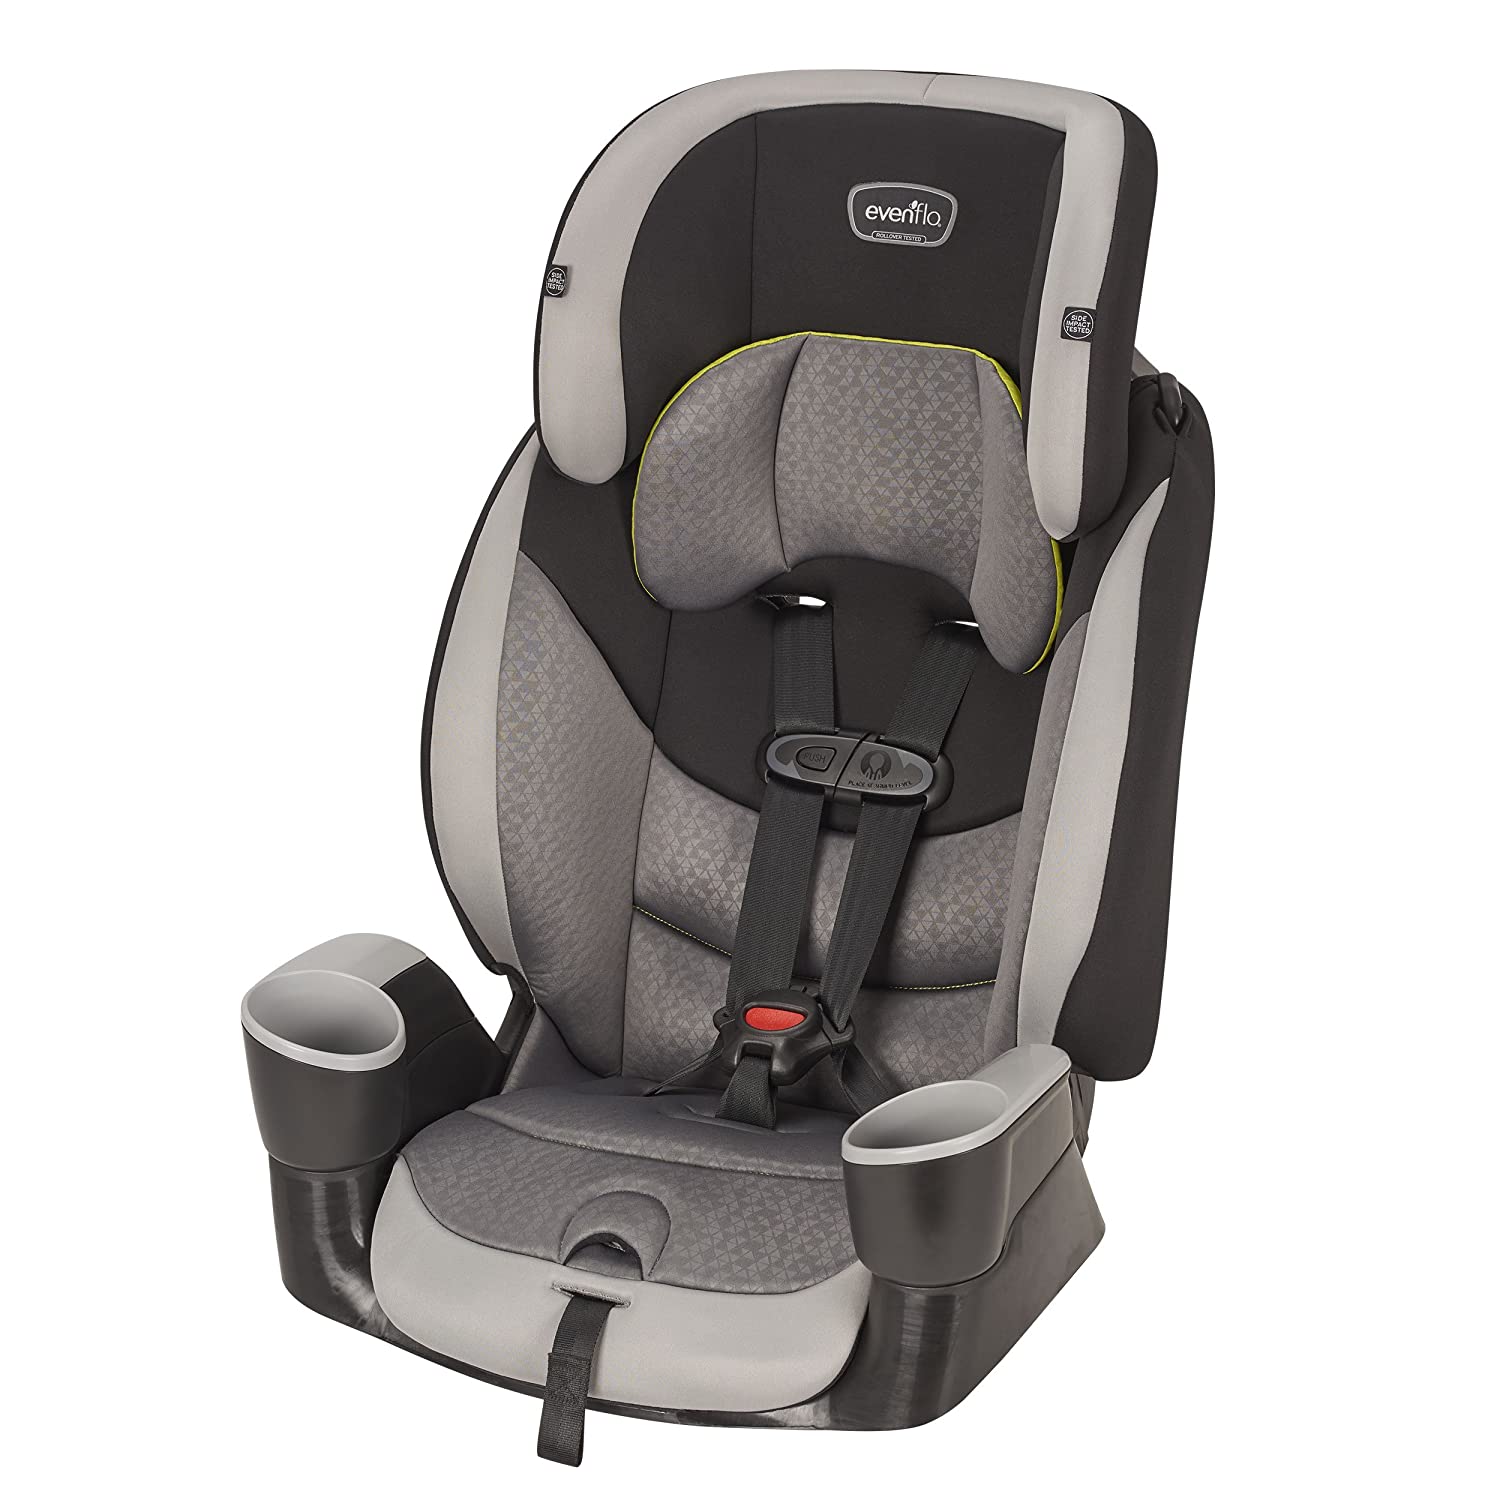 Evenflo 2 in 1 Booster Seat